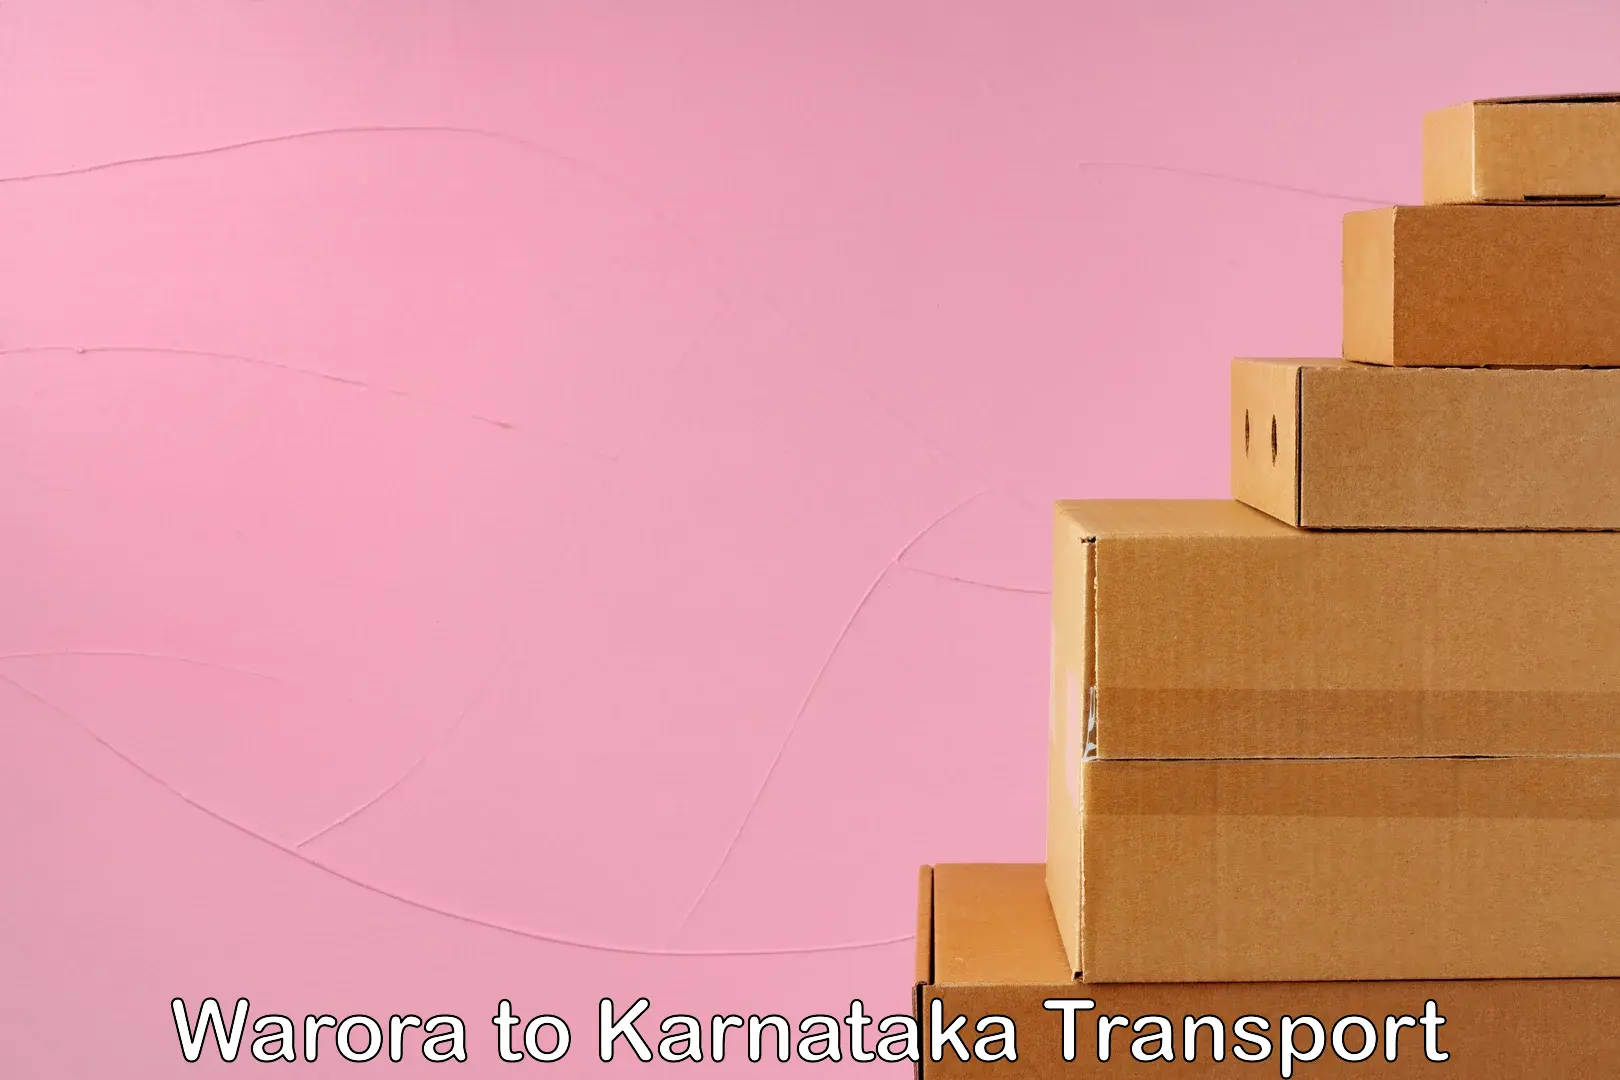 Container transport service Warora to Bantwal